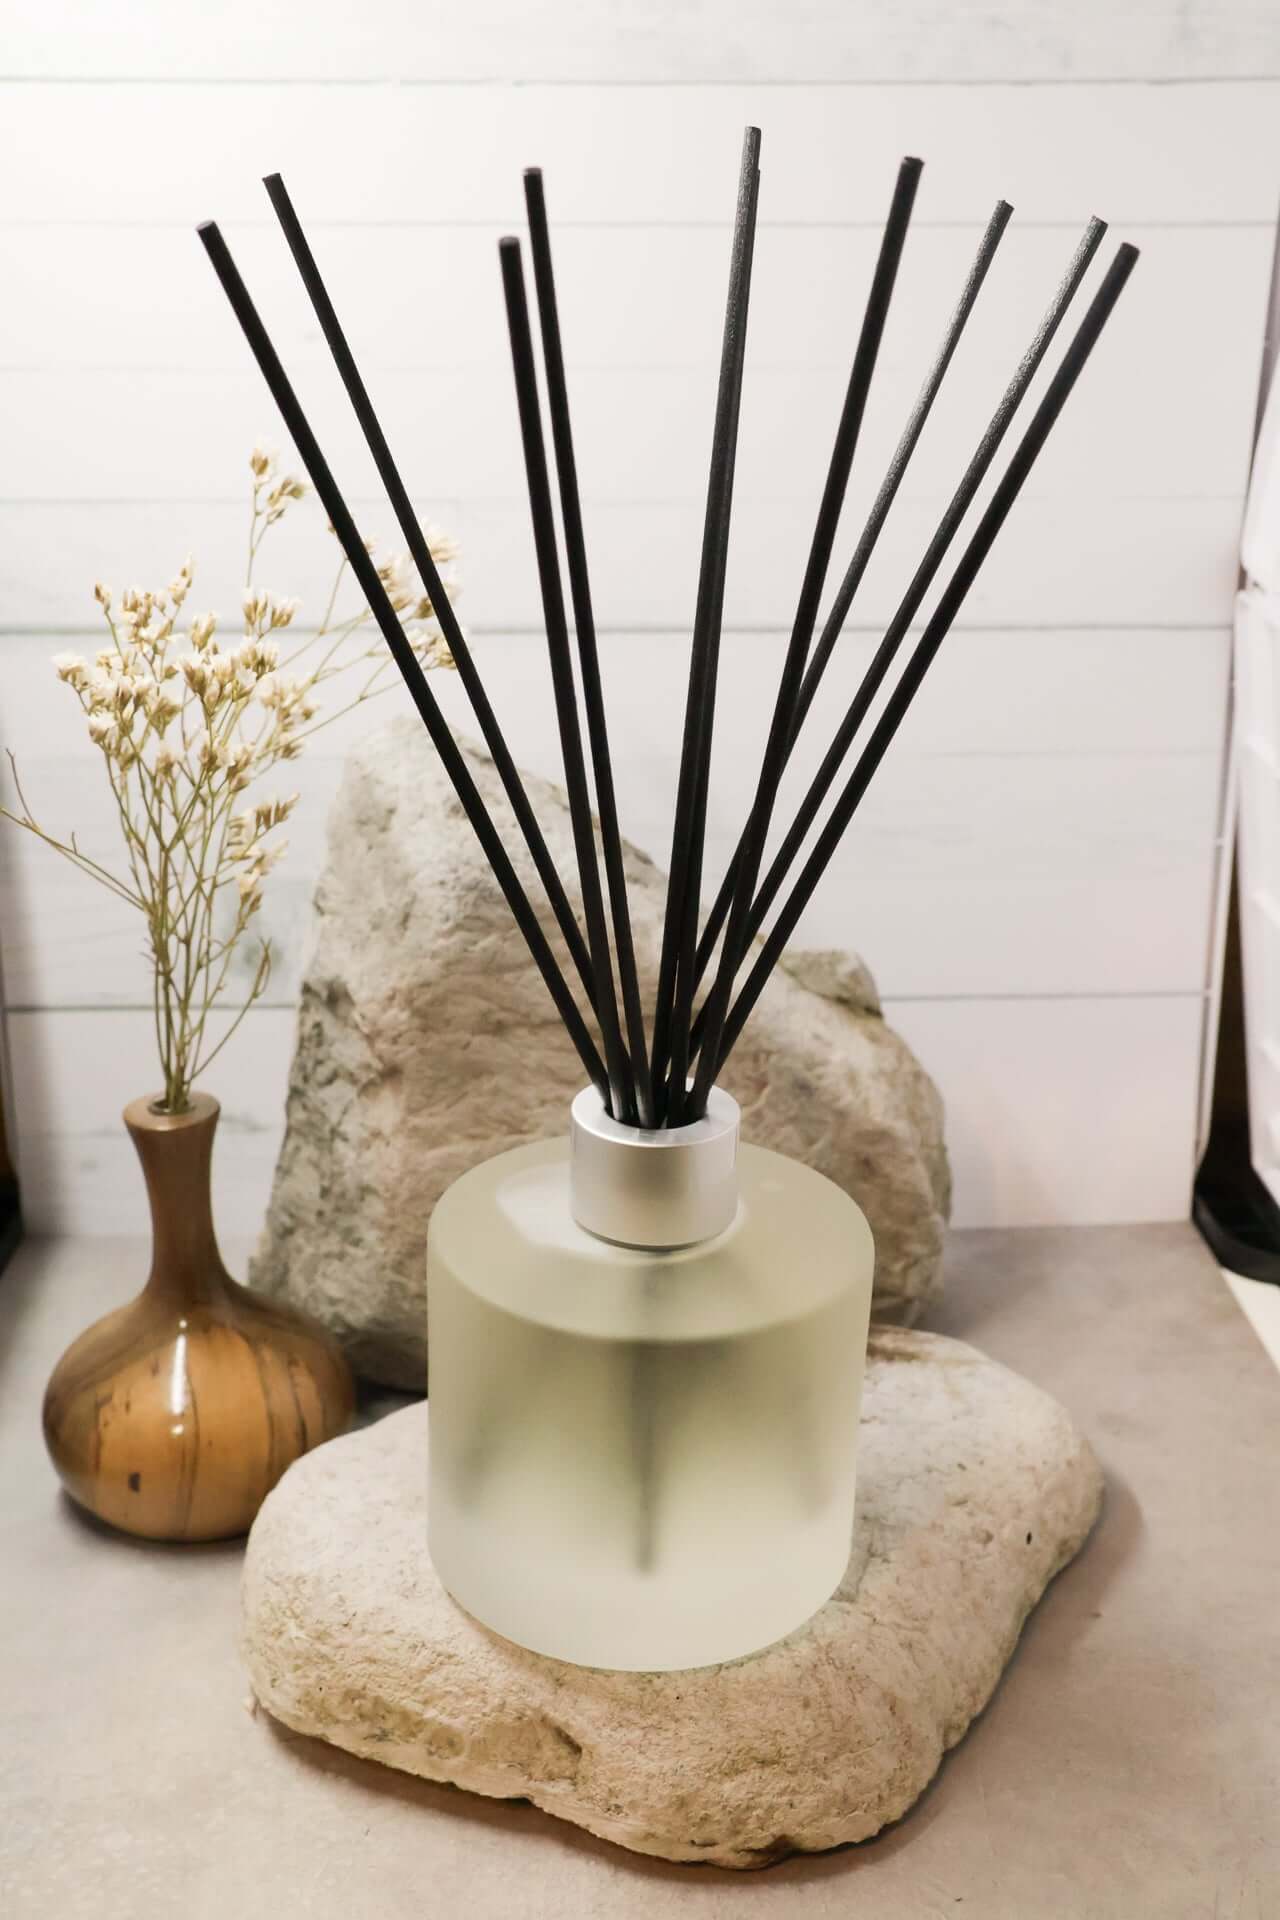 Crystal infused diffuser with wicks of the fragrance Coconut and Vanilla Bean